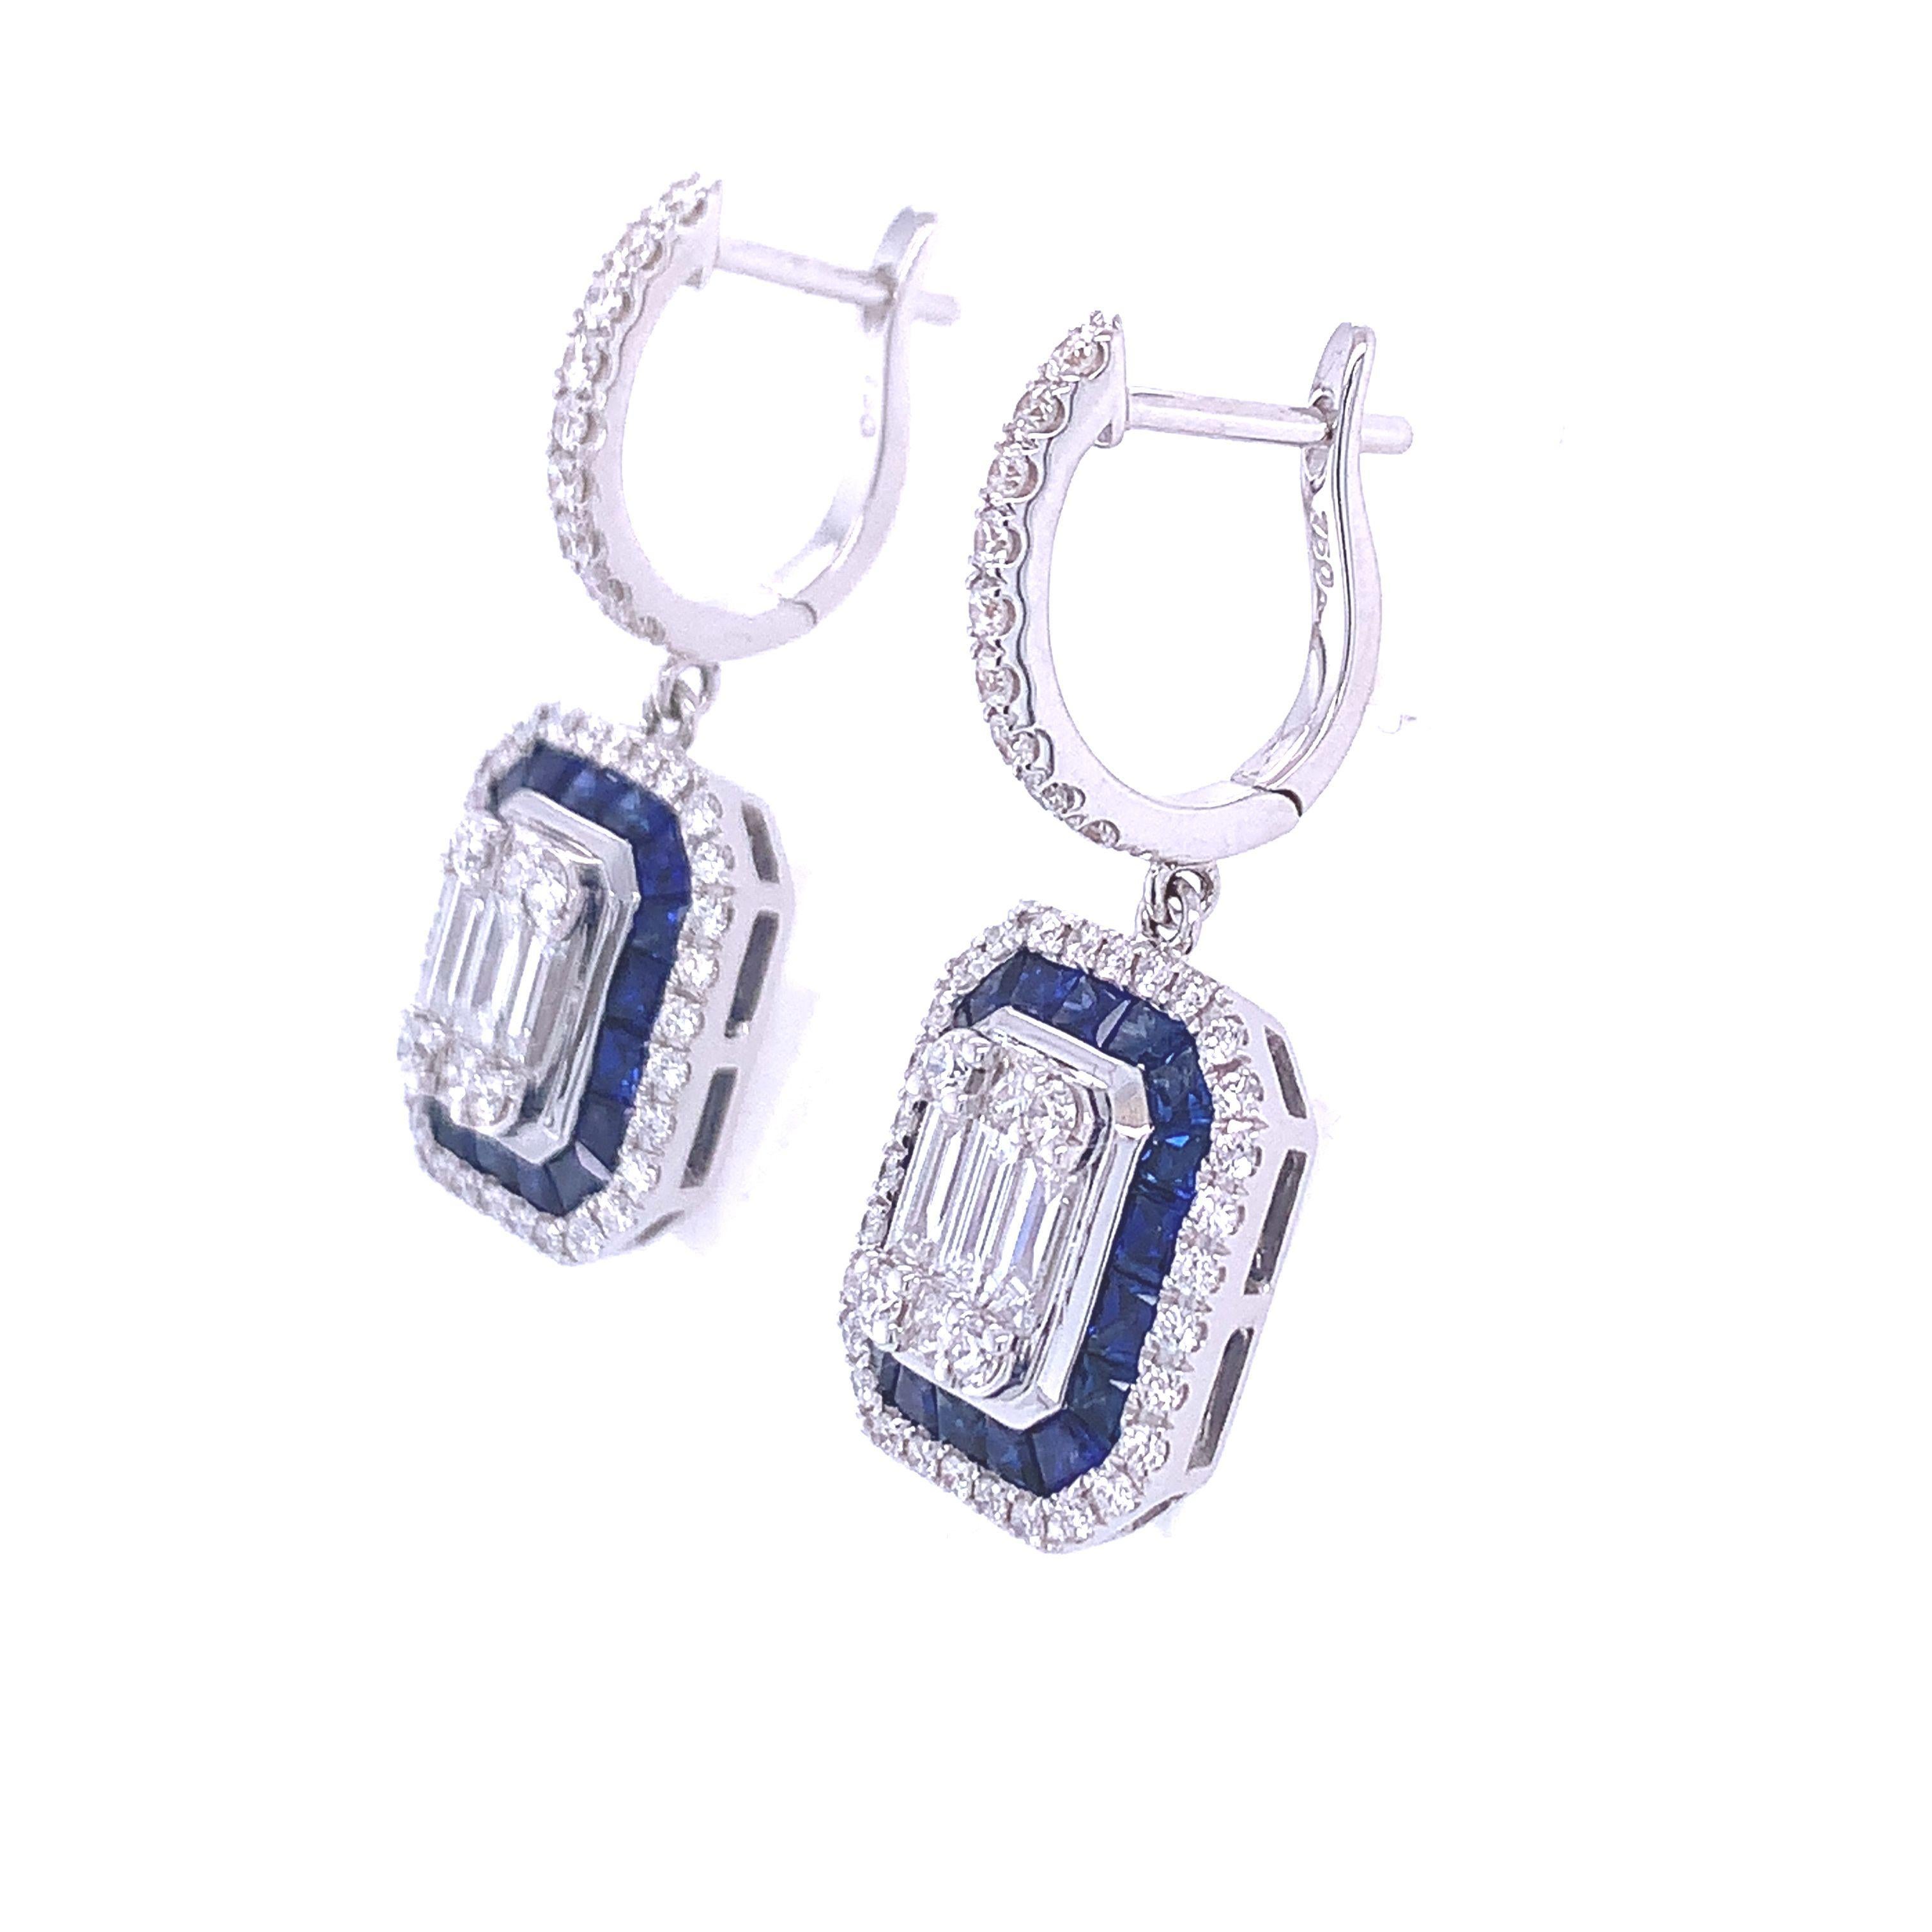 Contemporary 1.67 Carat Emerald Cut Sapphire and Diamond Halo Drop Earrings For Sale